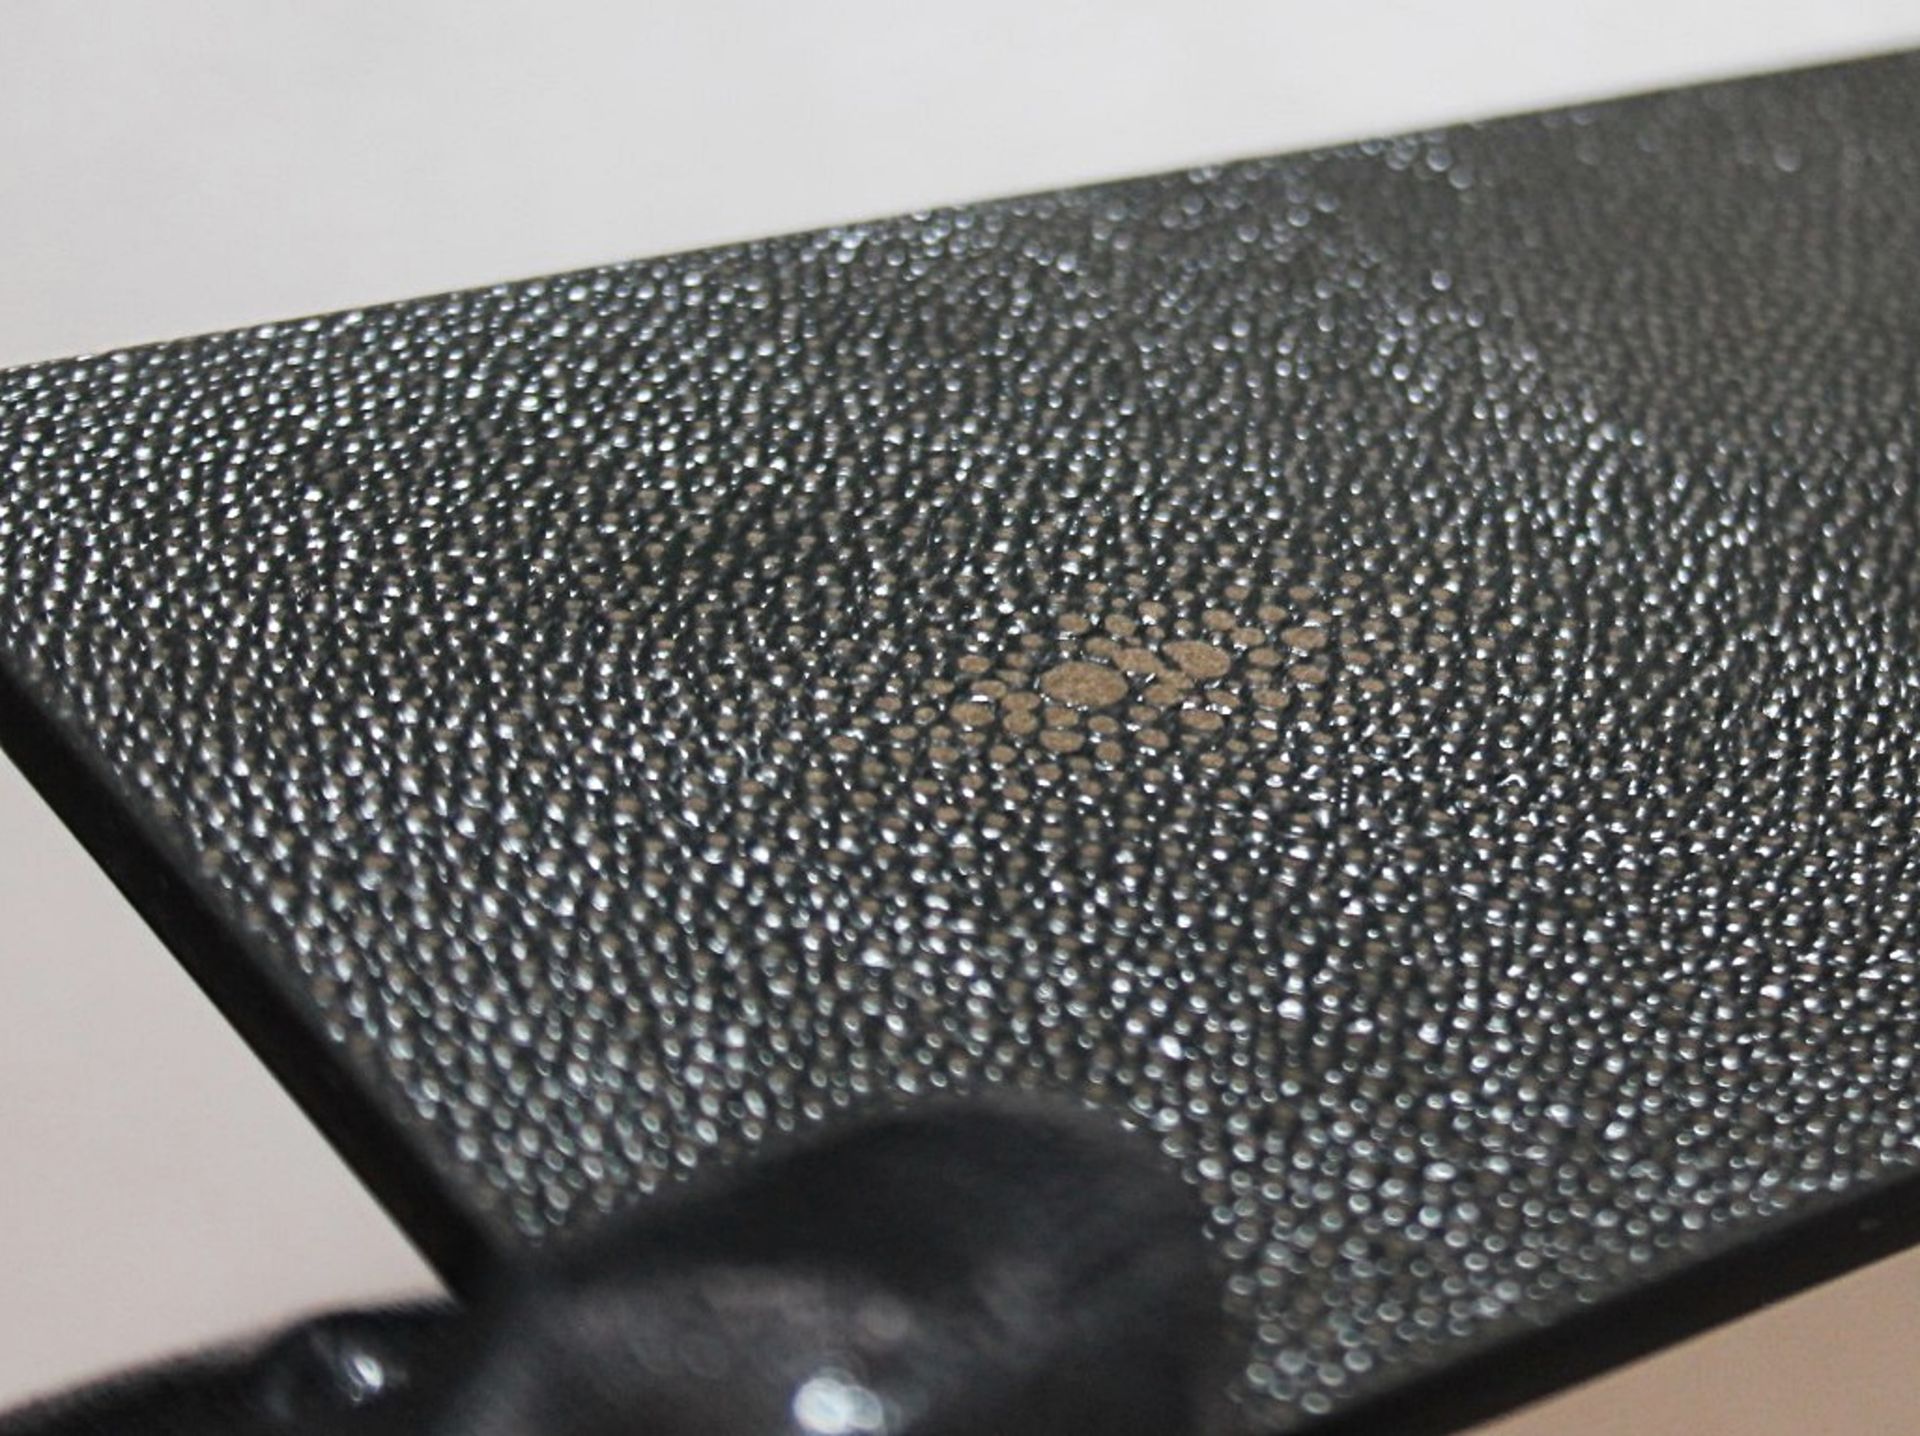 6 x POSH TRADING COMPANY Coastbox with Faux Shagreen Double Coaster Serving Mats - Original Price £ - Image 4 of 6